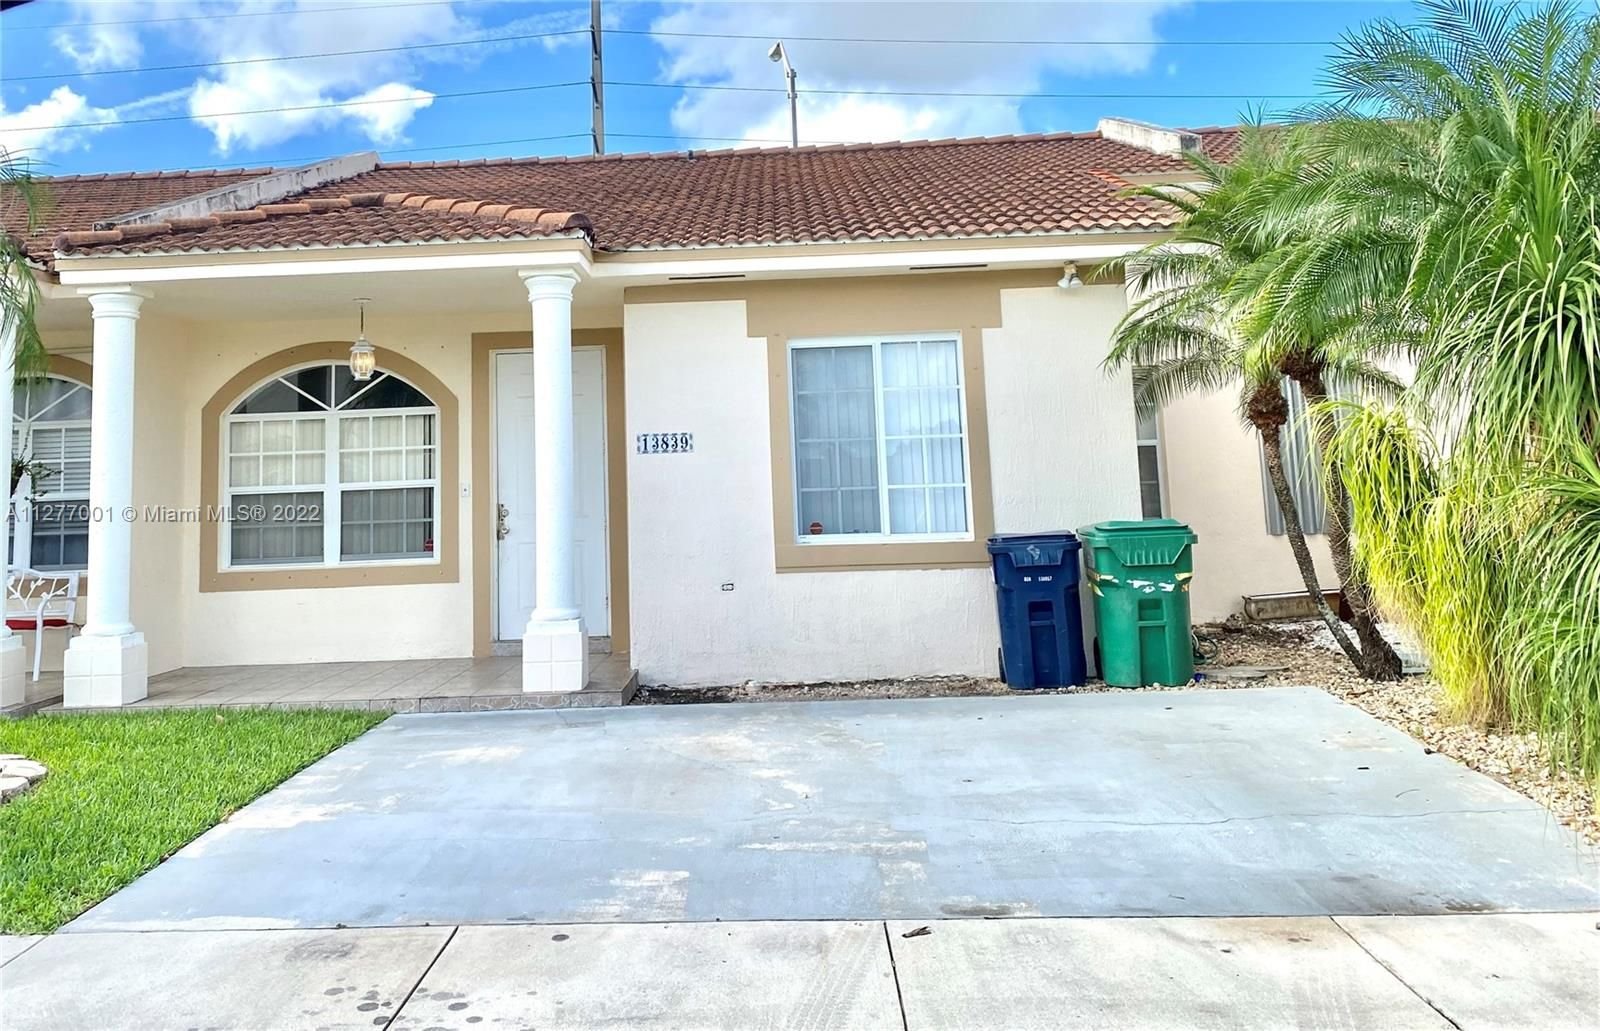 Real estate property located at 13839 152nd Ter #13839, Miami-Dade County, Miami, FL